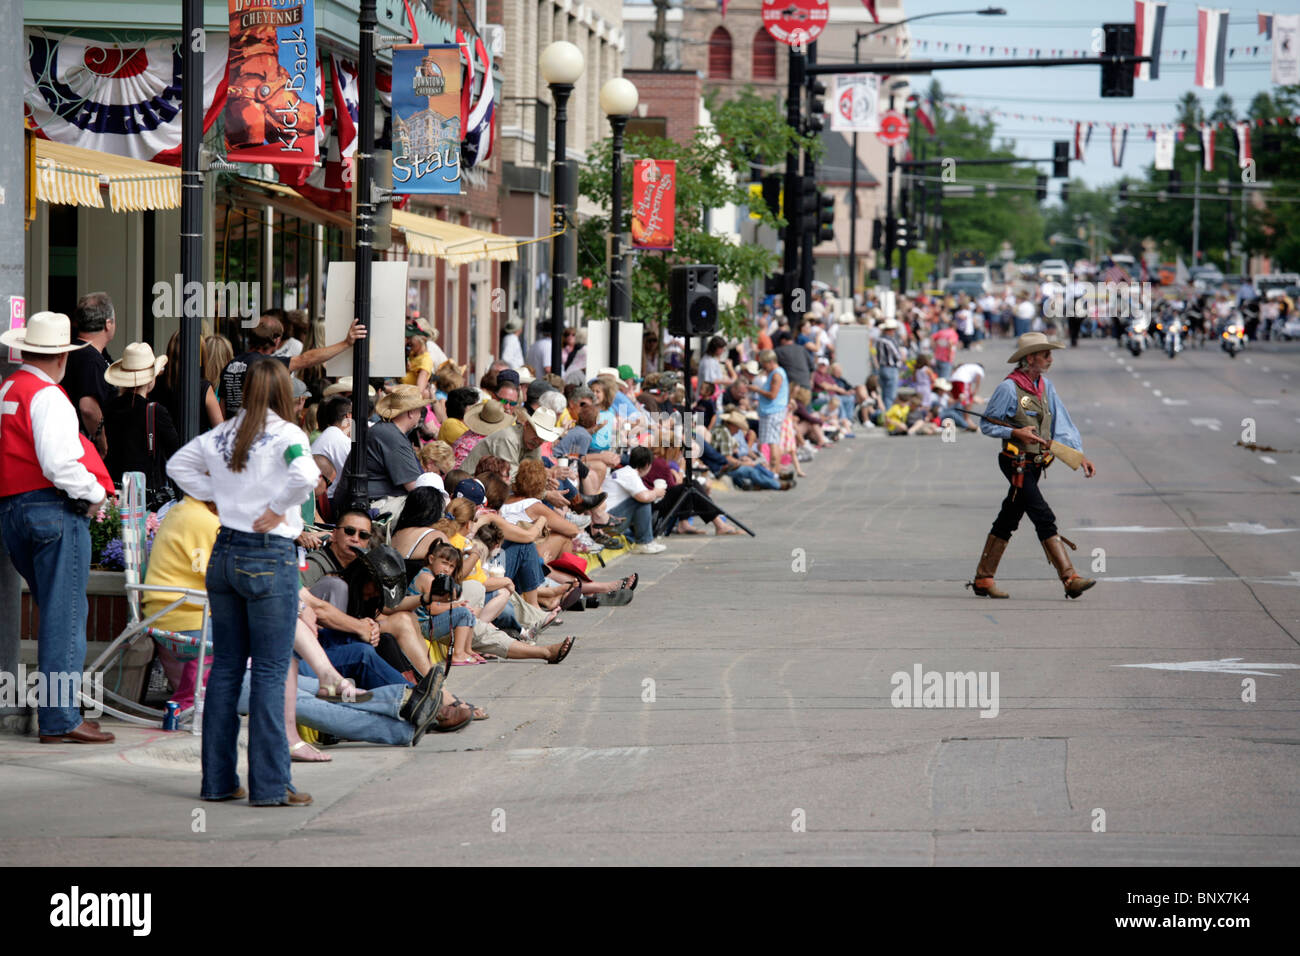 Parade in downtown Cheyenne, Wyoming, during the Frontier Days annual celebration. Stock Photo